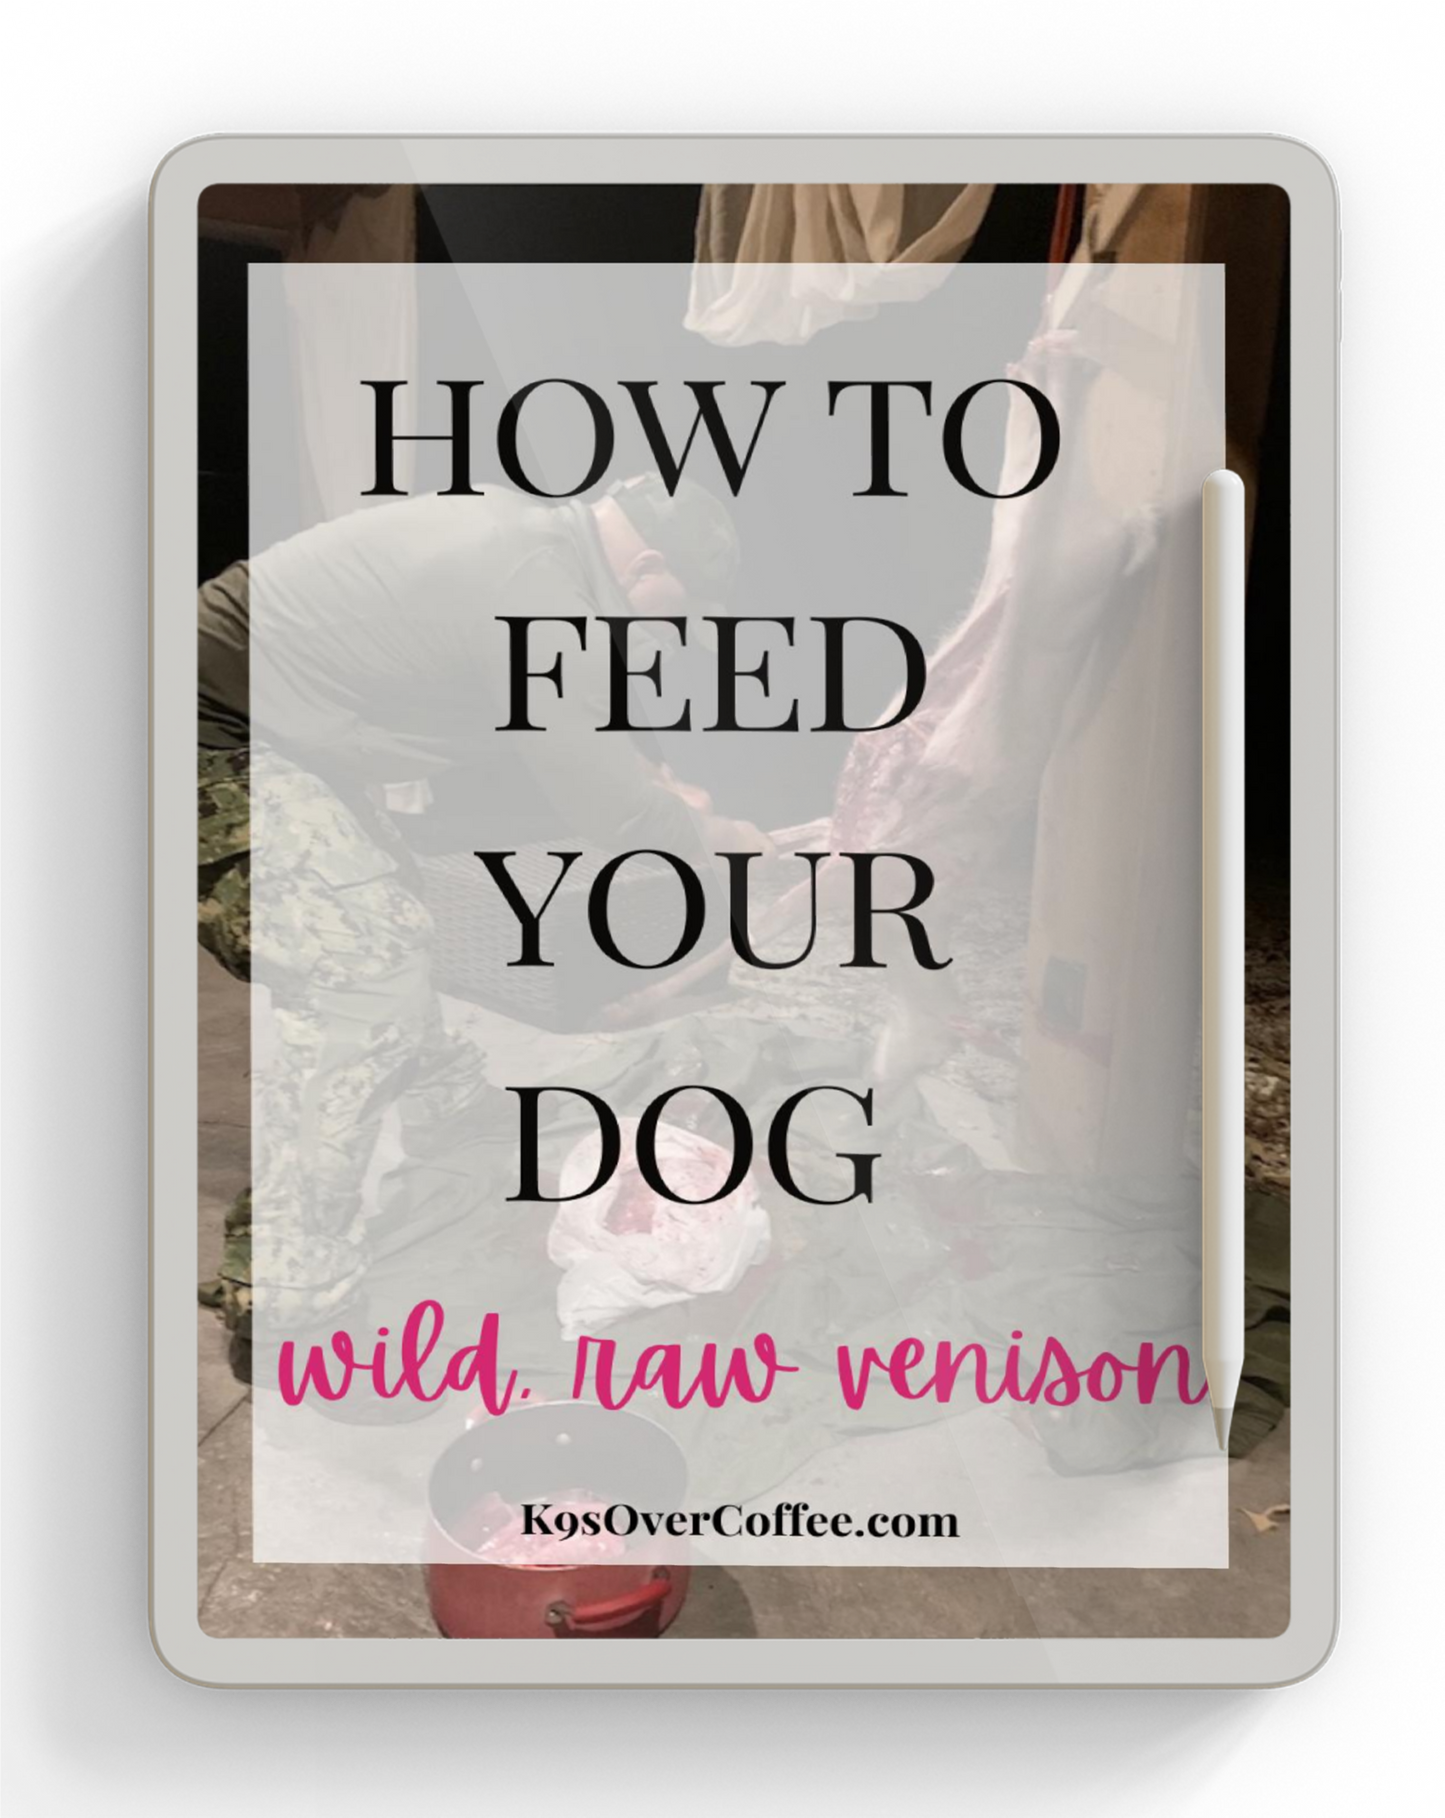 Ebook about how to feed your dog wild raw venison in homemade raw dog food